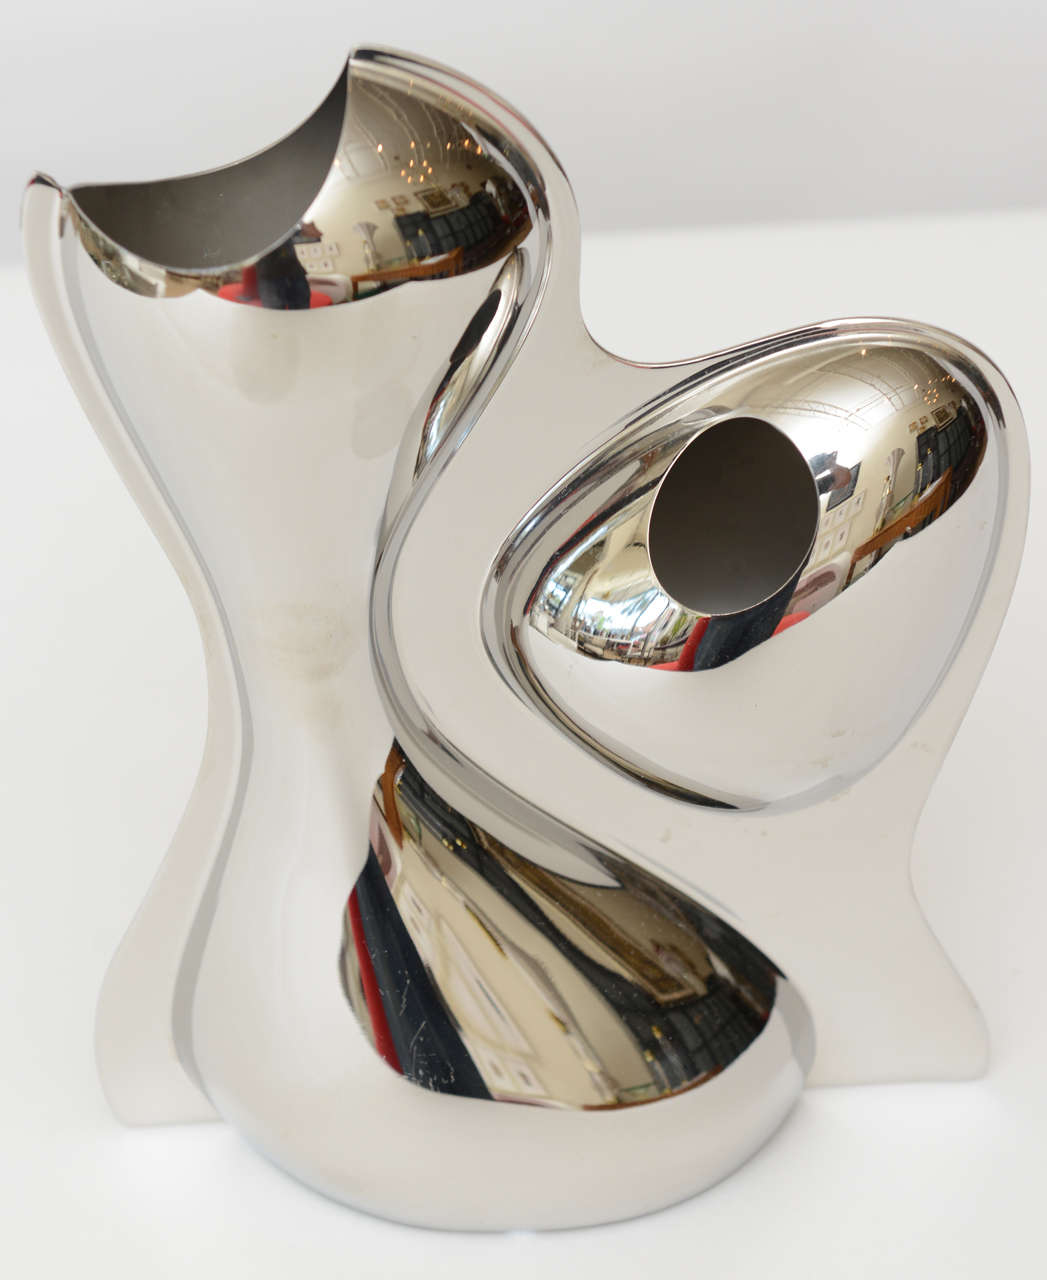 This wonderful artistic and sculptural mirrored stainless steel vase is modernist biomorphic. It is signed Ron arad for Alessi. There are two asymetrical openings for flowers... It has almost a mirrored Anish Kapoor reflective mirrored quality to